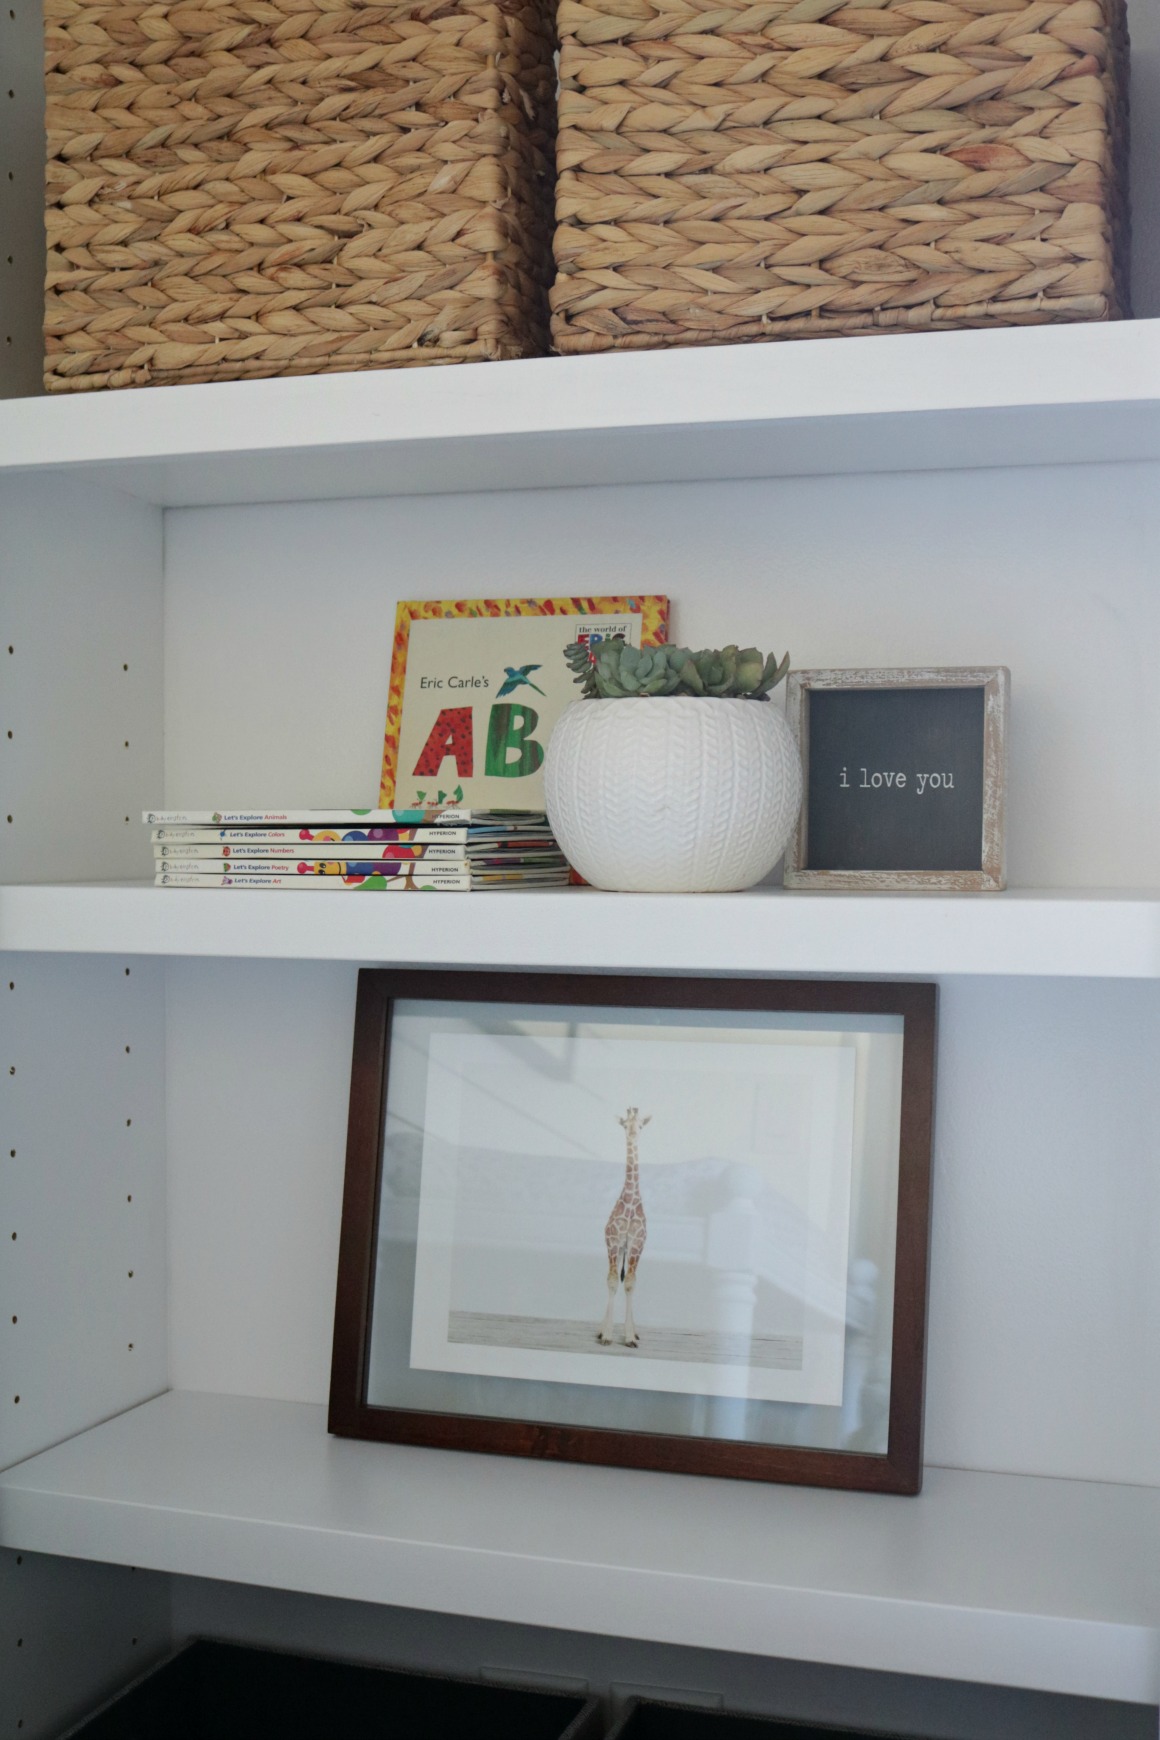 Window Seat and Built-In Bookcase DIY under $150